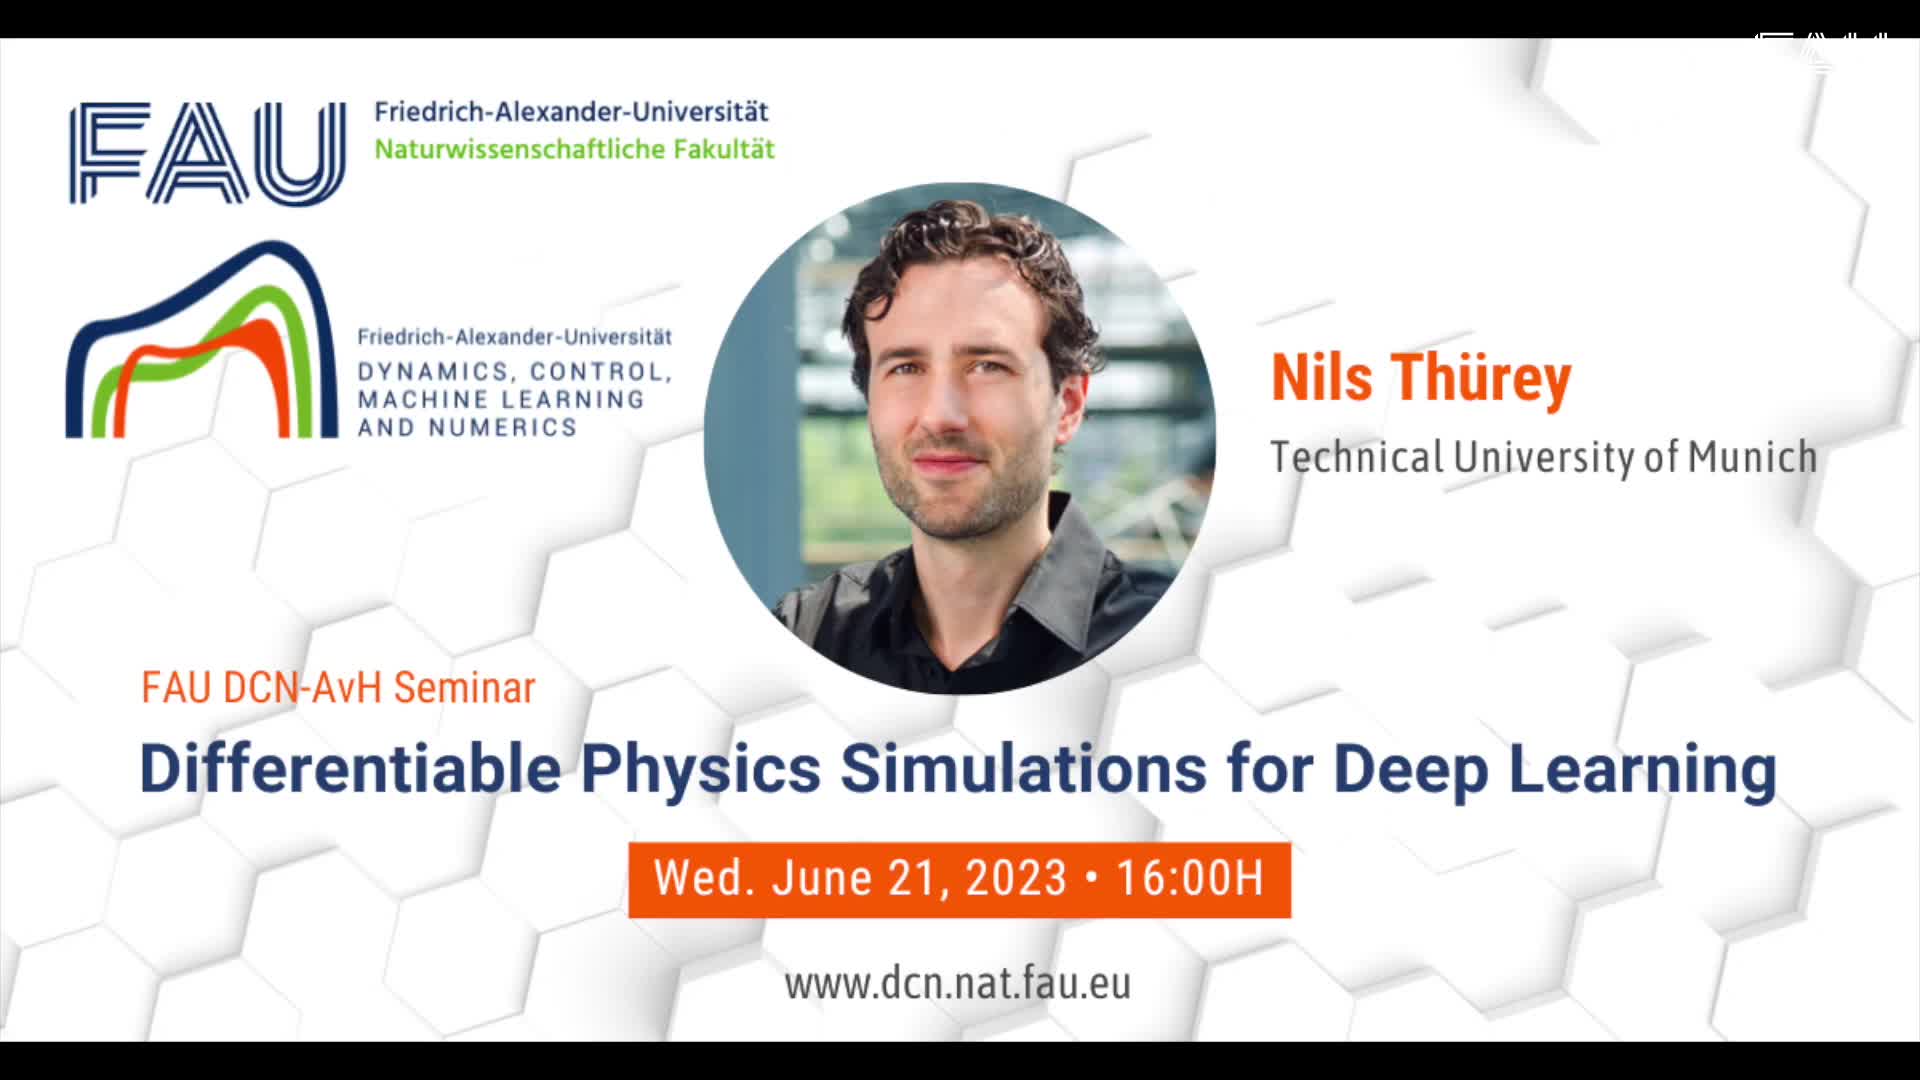 FAU DCN-AvH Seminar: Differentiable Physics Simulations for Deep Learning preview image